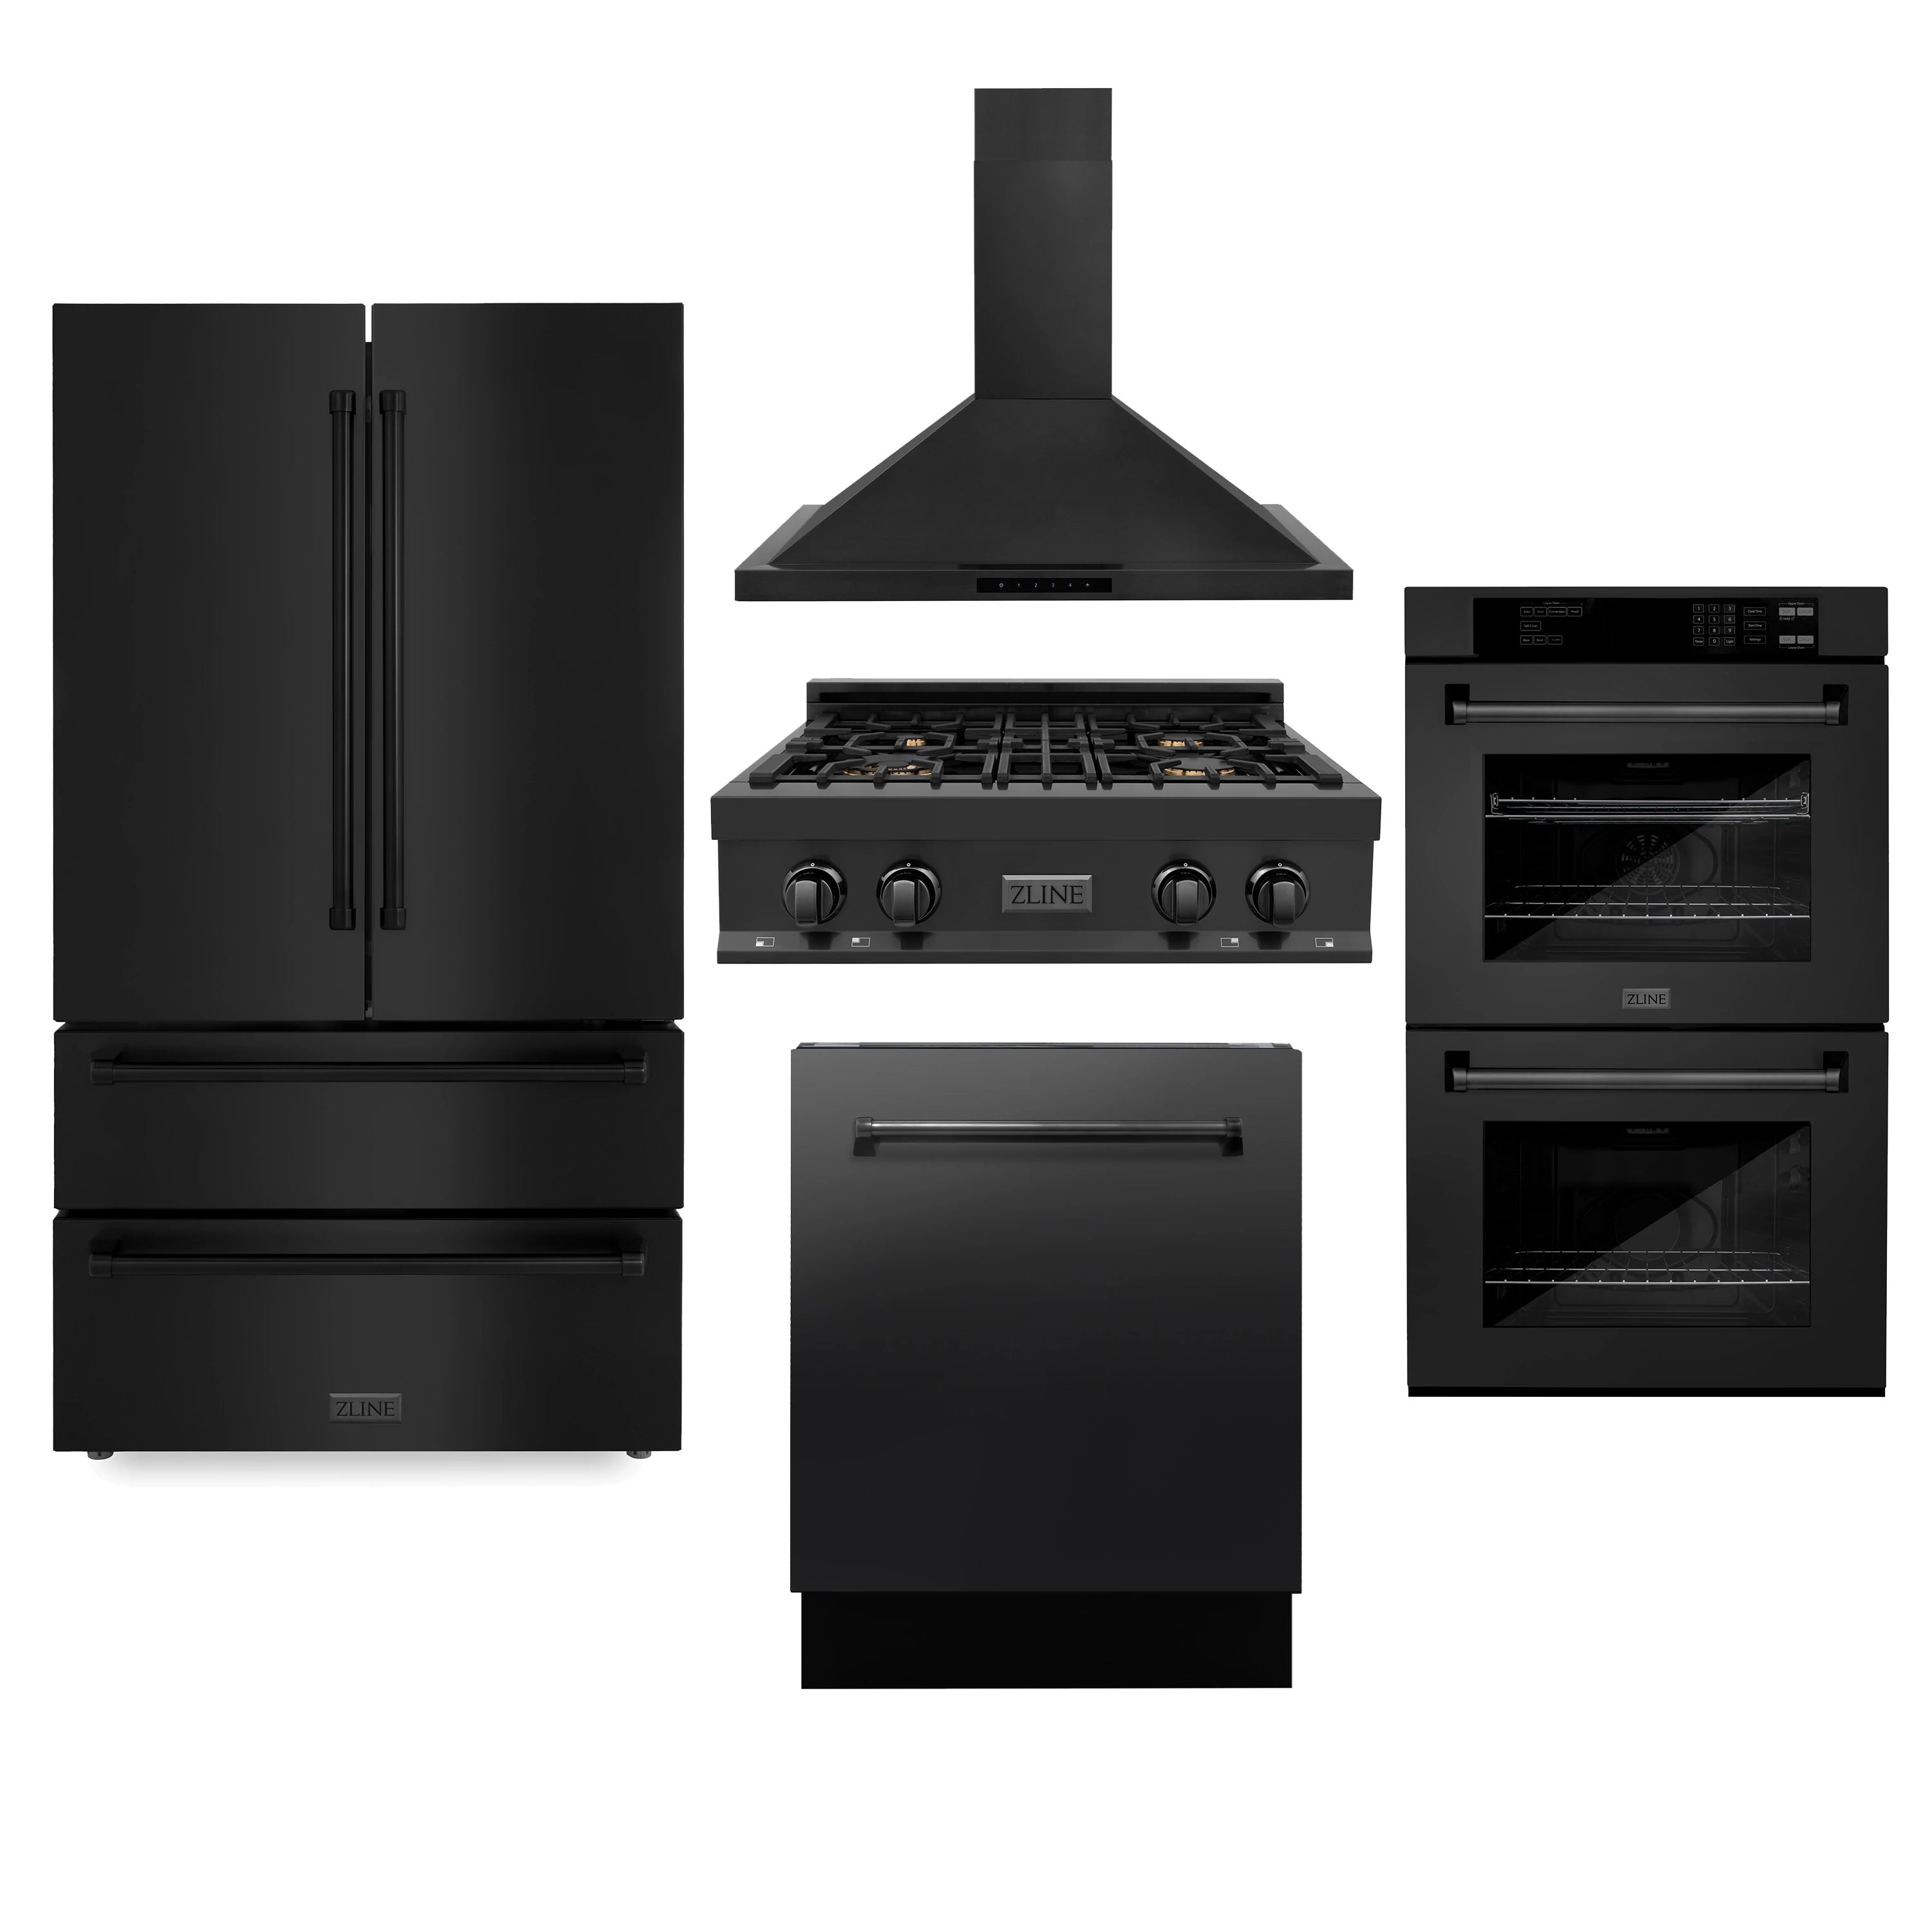 ZLINE 5-Piece Appliance Package - 30-Inch Rangetop with Brass Burners, Refrigerator, 30-Inch Electric Double Wall Oven, 3-Rack Dishwasher, and Convertible Wall Mount Hood in Black Stainless Steel (5KPR-RTBRH30-AWDDWV)